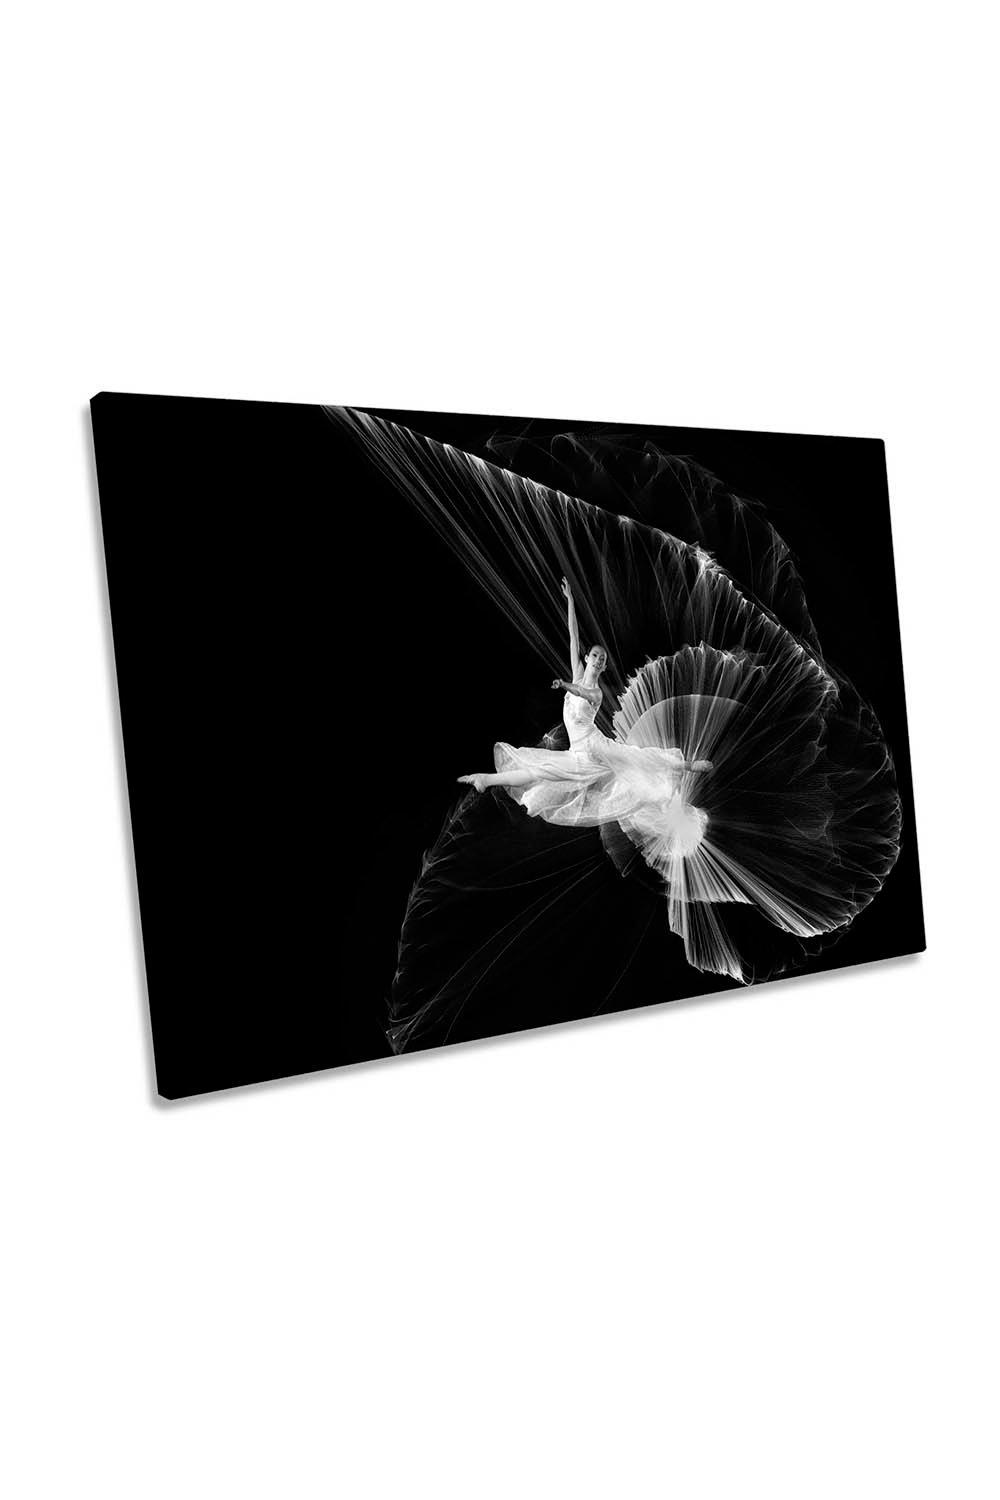 Come Lets Dance Ballerina Performance Canvas Wall Art Picture Print